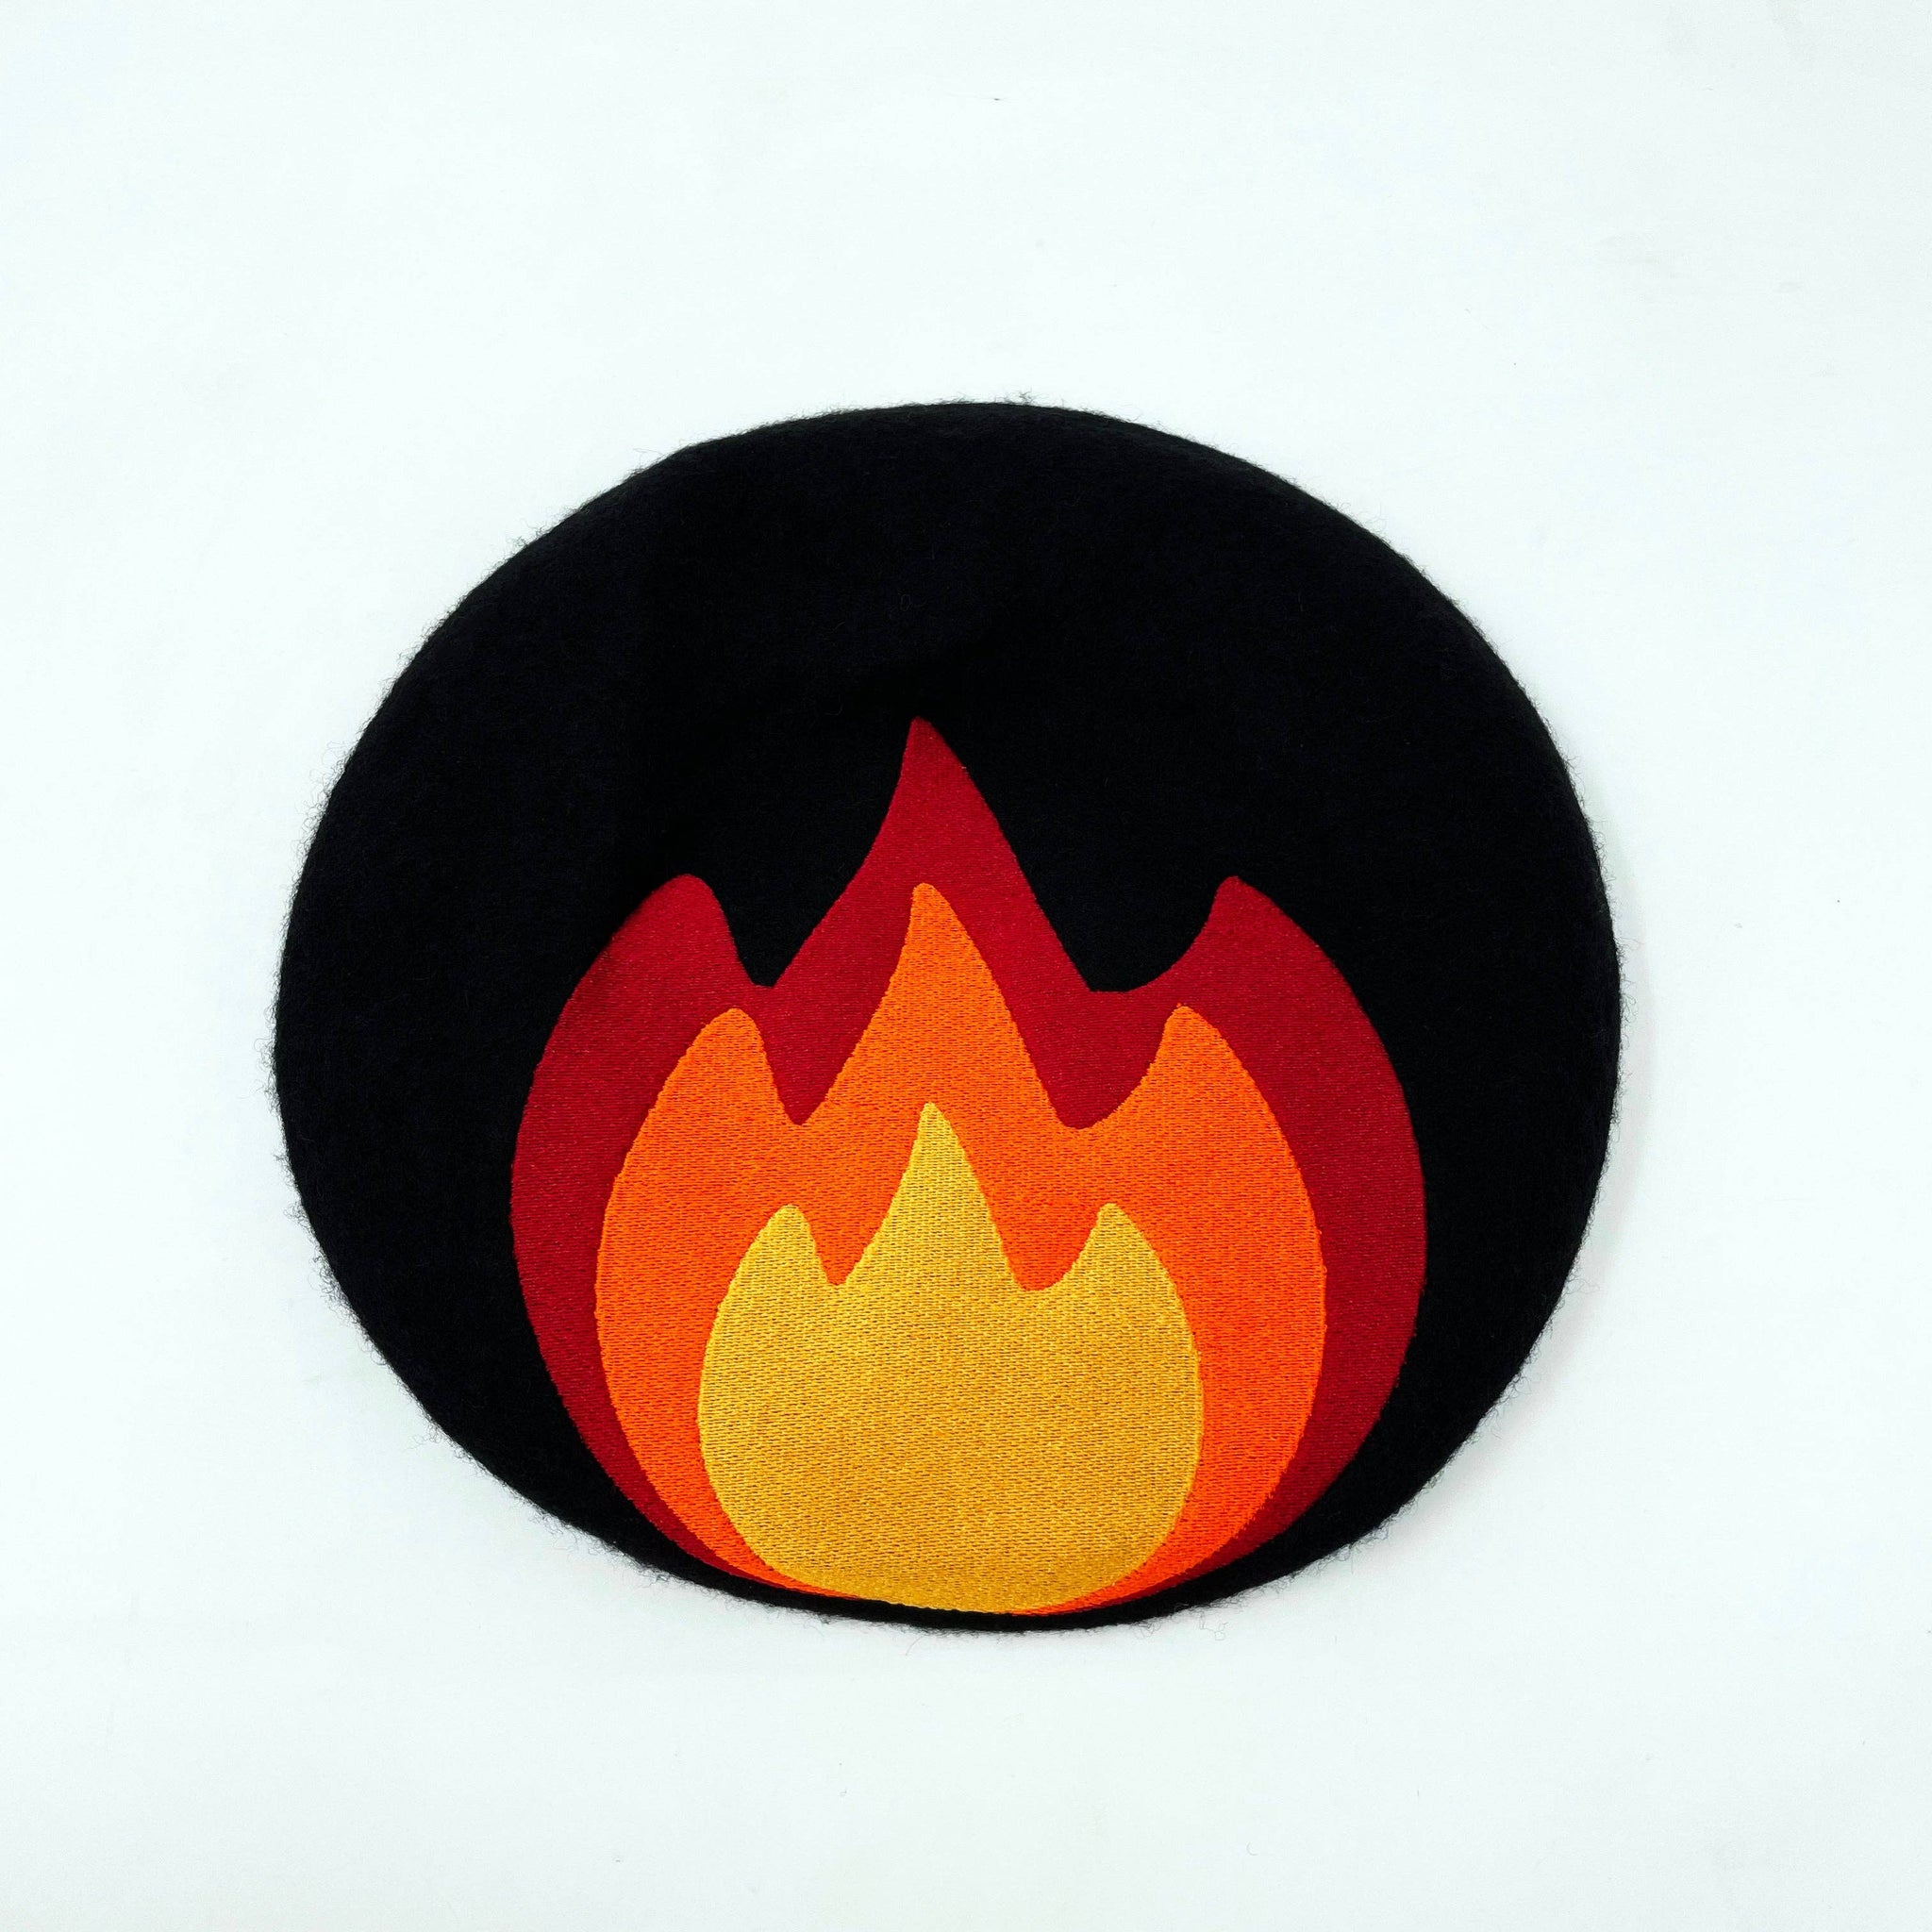 Instant Shipping! Lit Beret